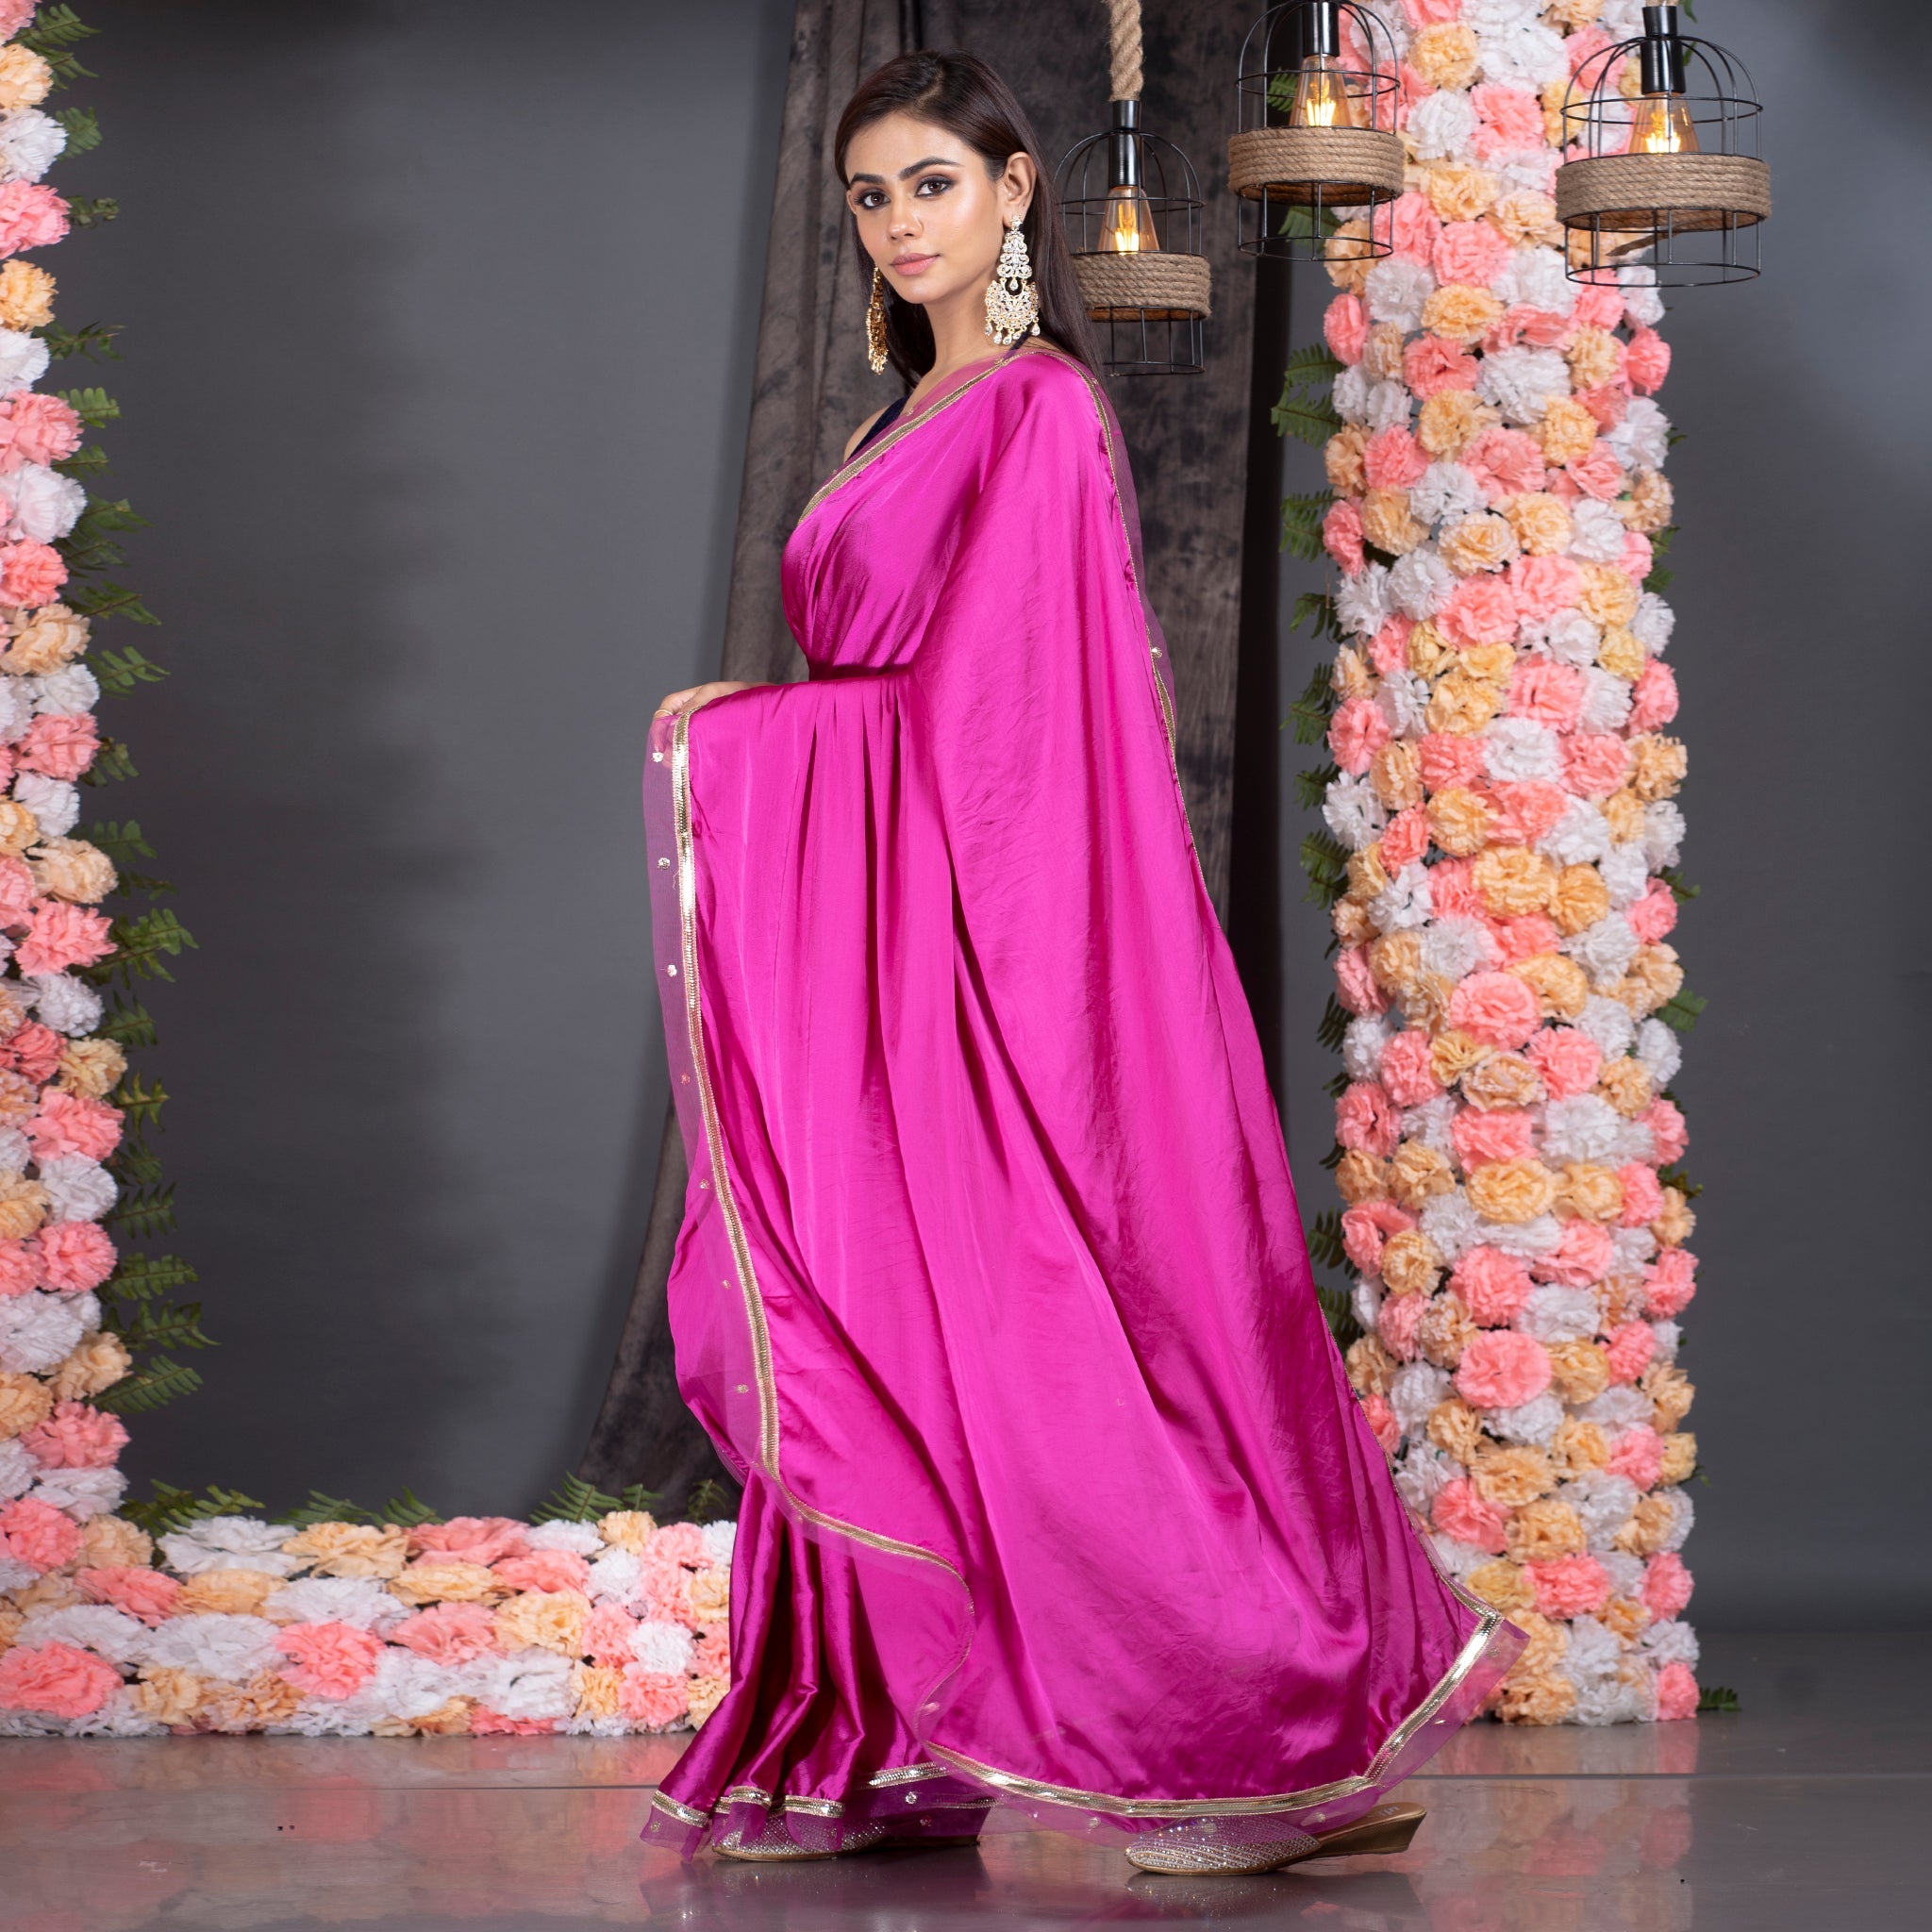 Women's Magenta Satin Saree With Embroidered Border - Boveee